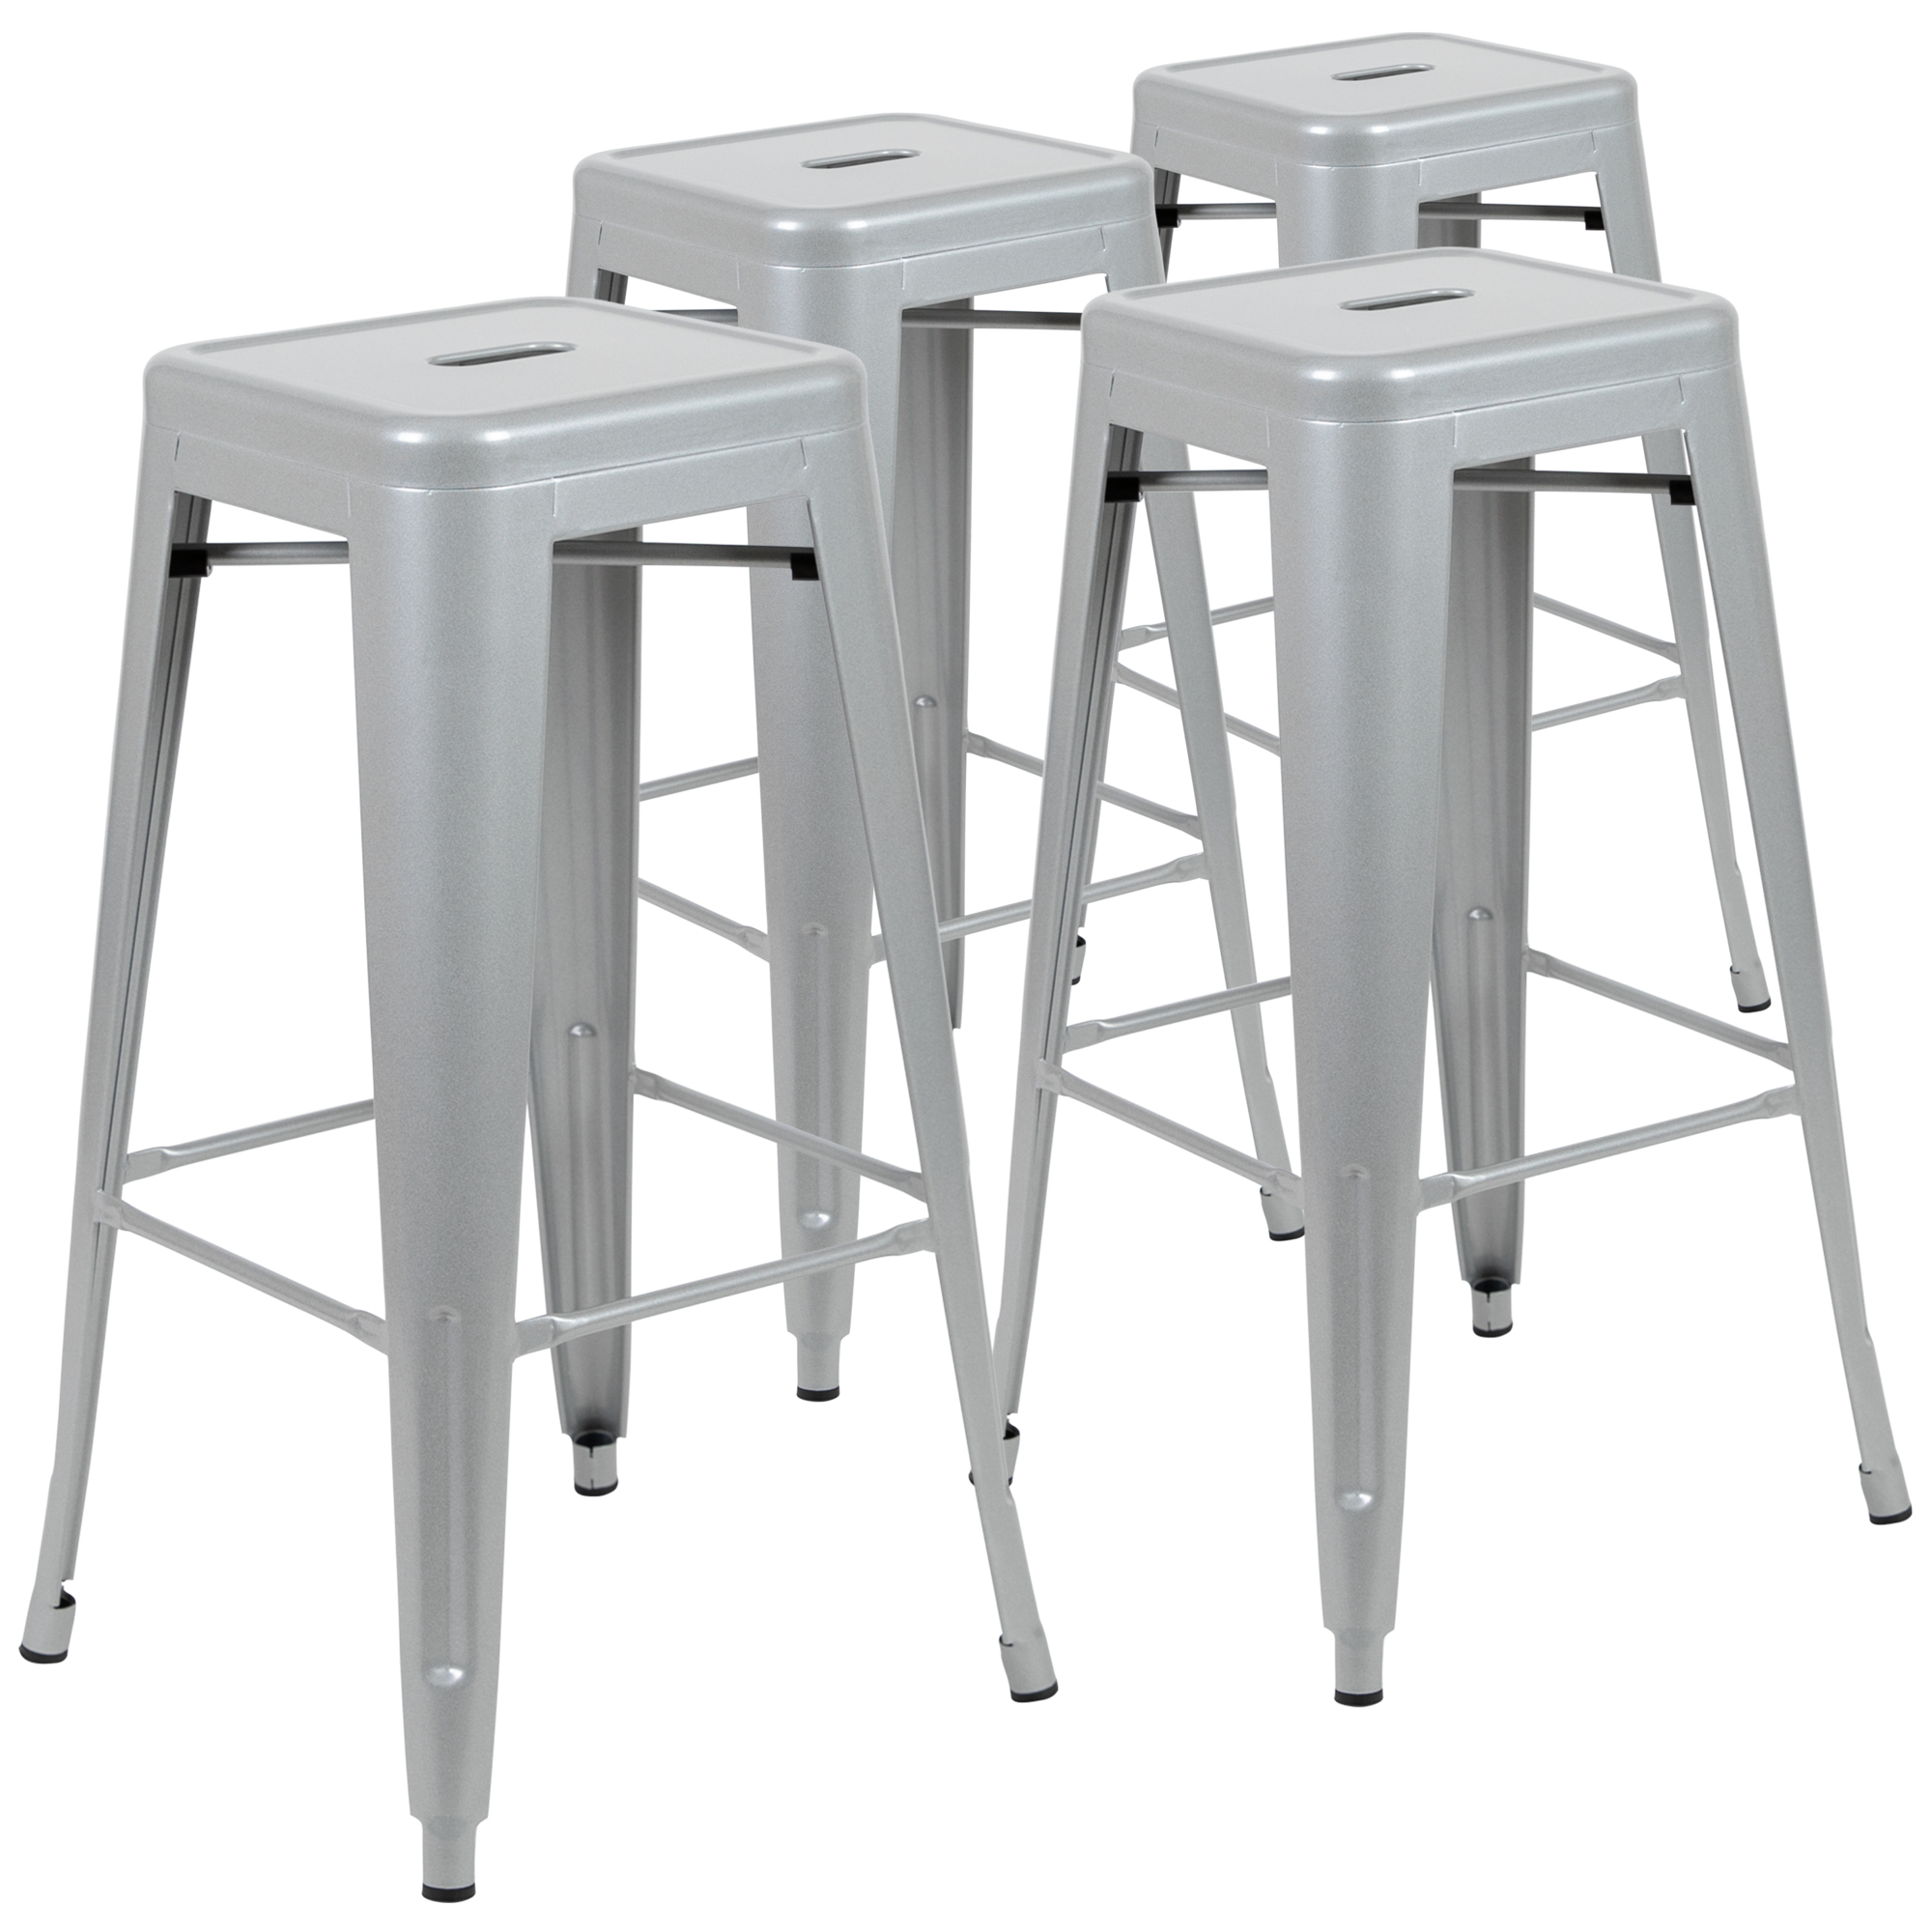 Flash Furniture, 4 Pack 30Inch High Metal Indoor Bar Stool, Silver, Primary Color Gray, Included (qty.) 4, Model 4ET3132030SVR